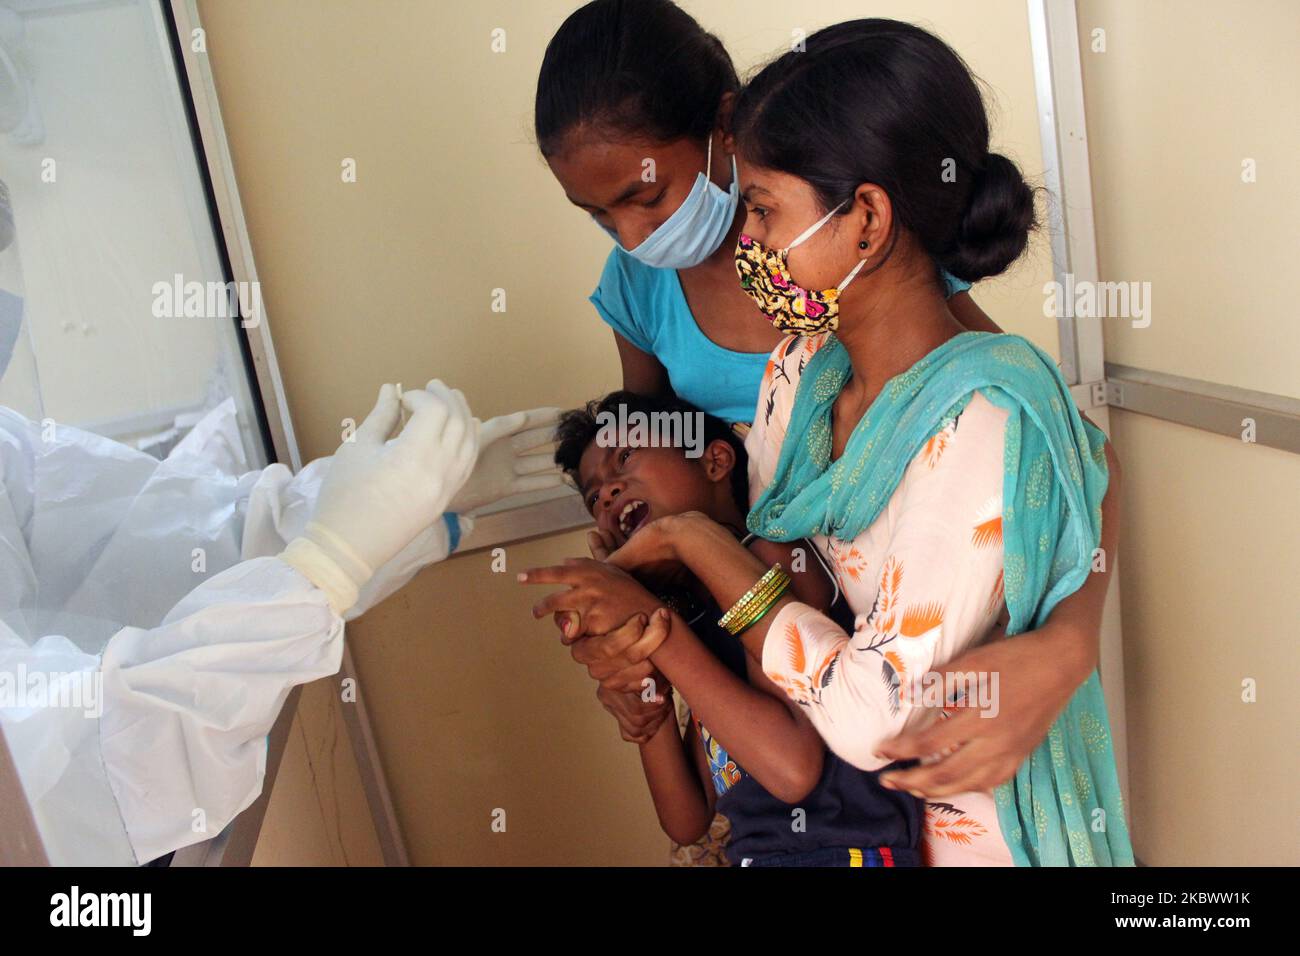 A medical staff collects a sample from a child for Rapid Antigen Test (RAT) for the COVID-19 coronavirus at Chacha Nehru Bal Chikitsalaya near Geeta Colony in New Delhi on August 7, 2020. India is now the third country to cross the two million mark. It reported 62,170 cases in the past 24 hours, taking its total tally up to 2,025,409. The country has reported around 40,700 deaths so far. (Photo by Mayank Makhija/NurPhoto) Stock Photo